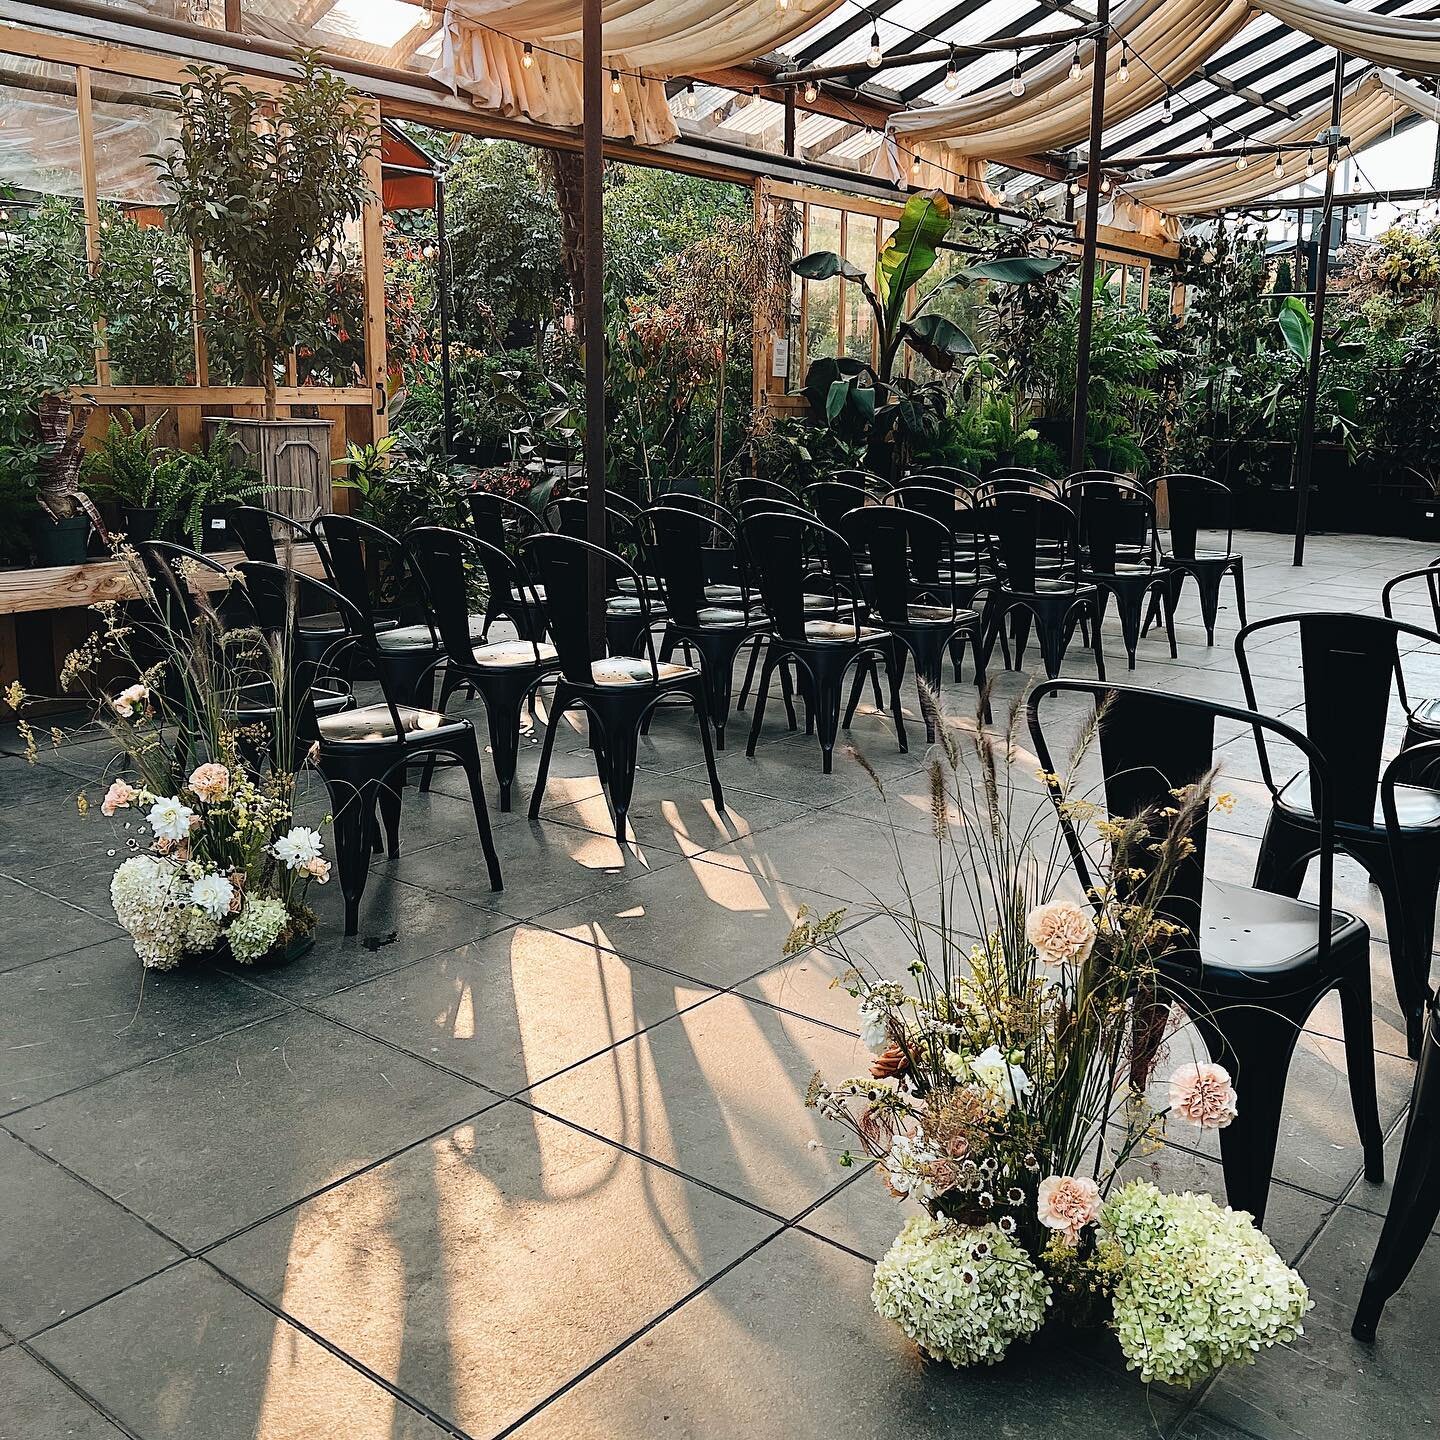 .. and that&rsquo;s a wrap on my &lsquo;22 weddings!  now it&rsquo;s time for me to focus on being a new mom and shifting energy to my online shop for my off season. so thankful for a very mellow wedding season! xx
.
.
.
. 

Venue: @blockhousepdx @po